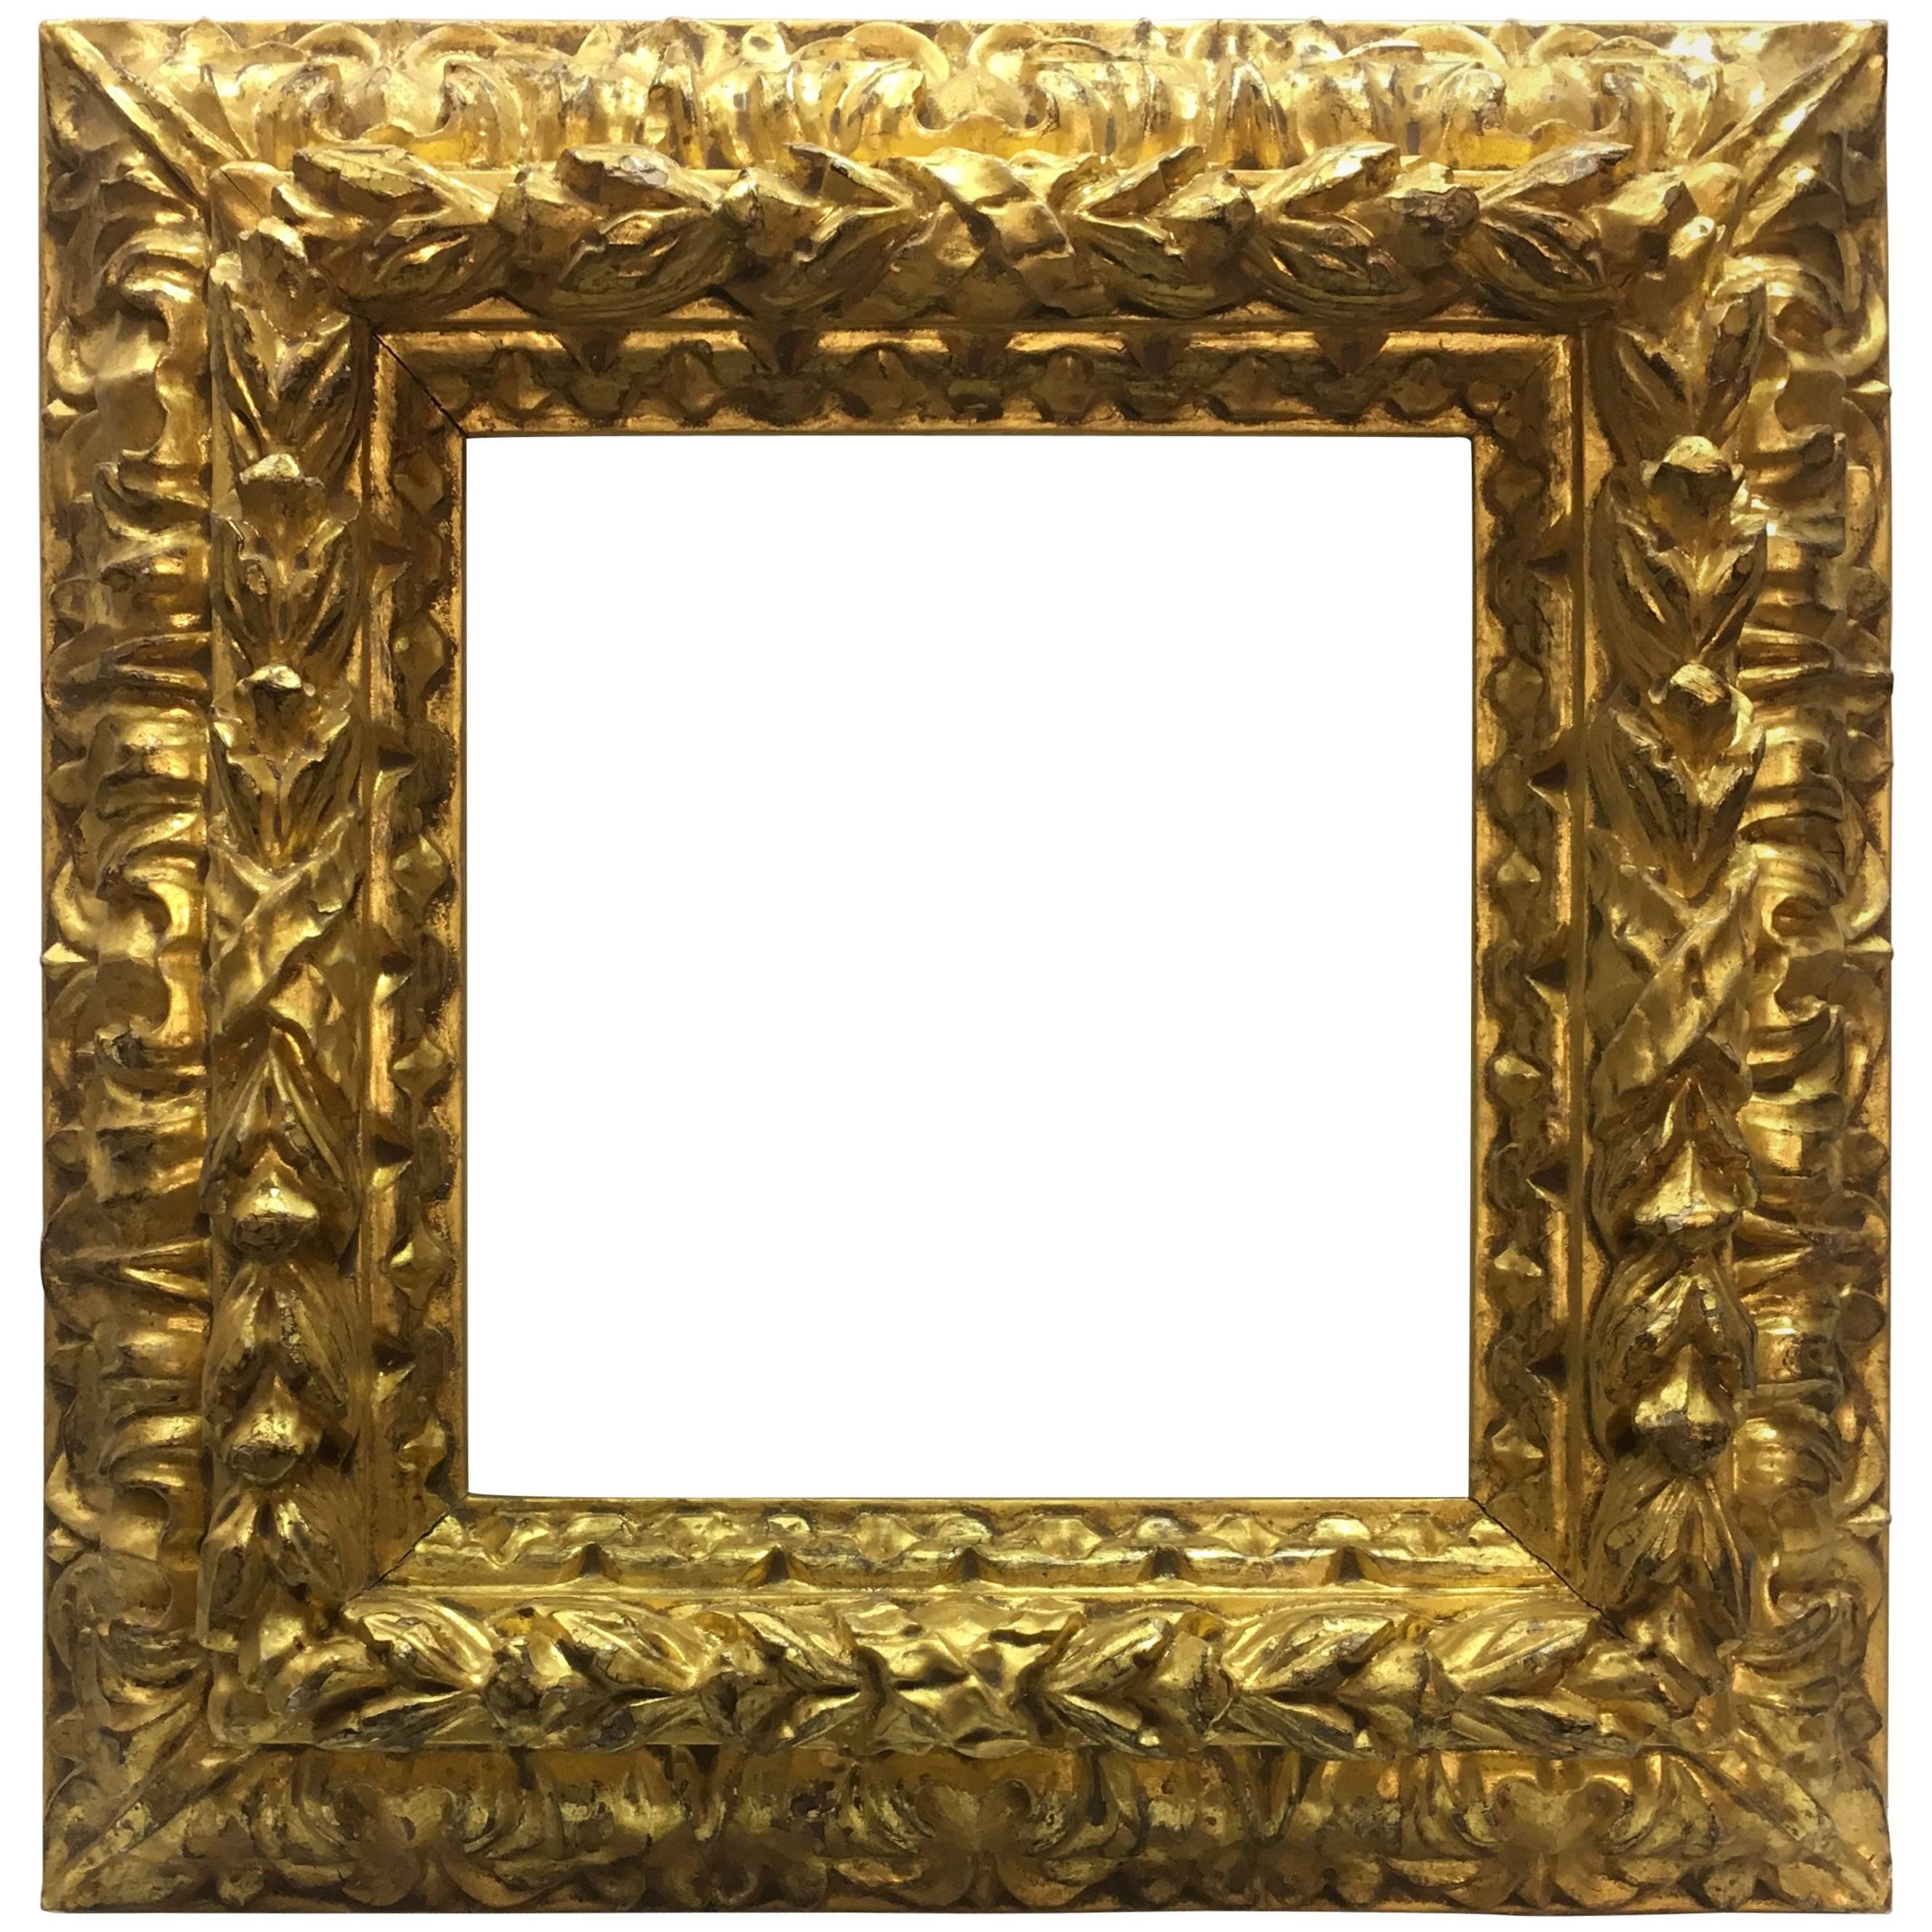 Italian Contemporary Hand-Carved Wood Frame with Gold Leaf Cover